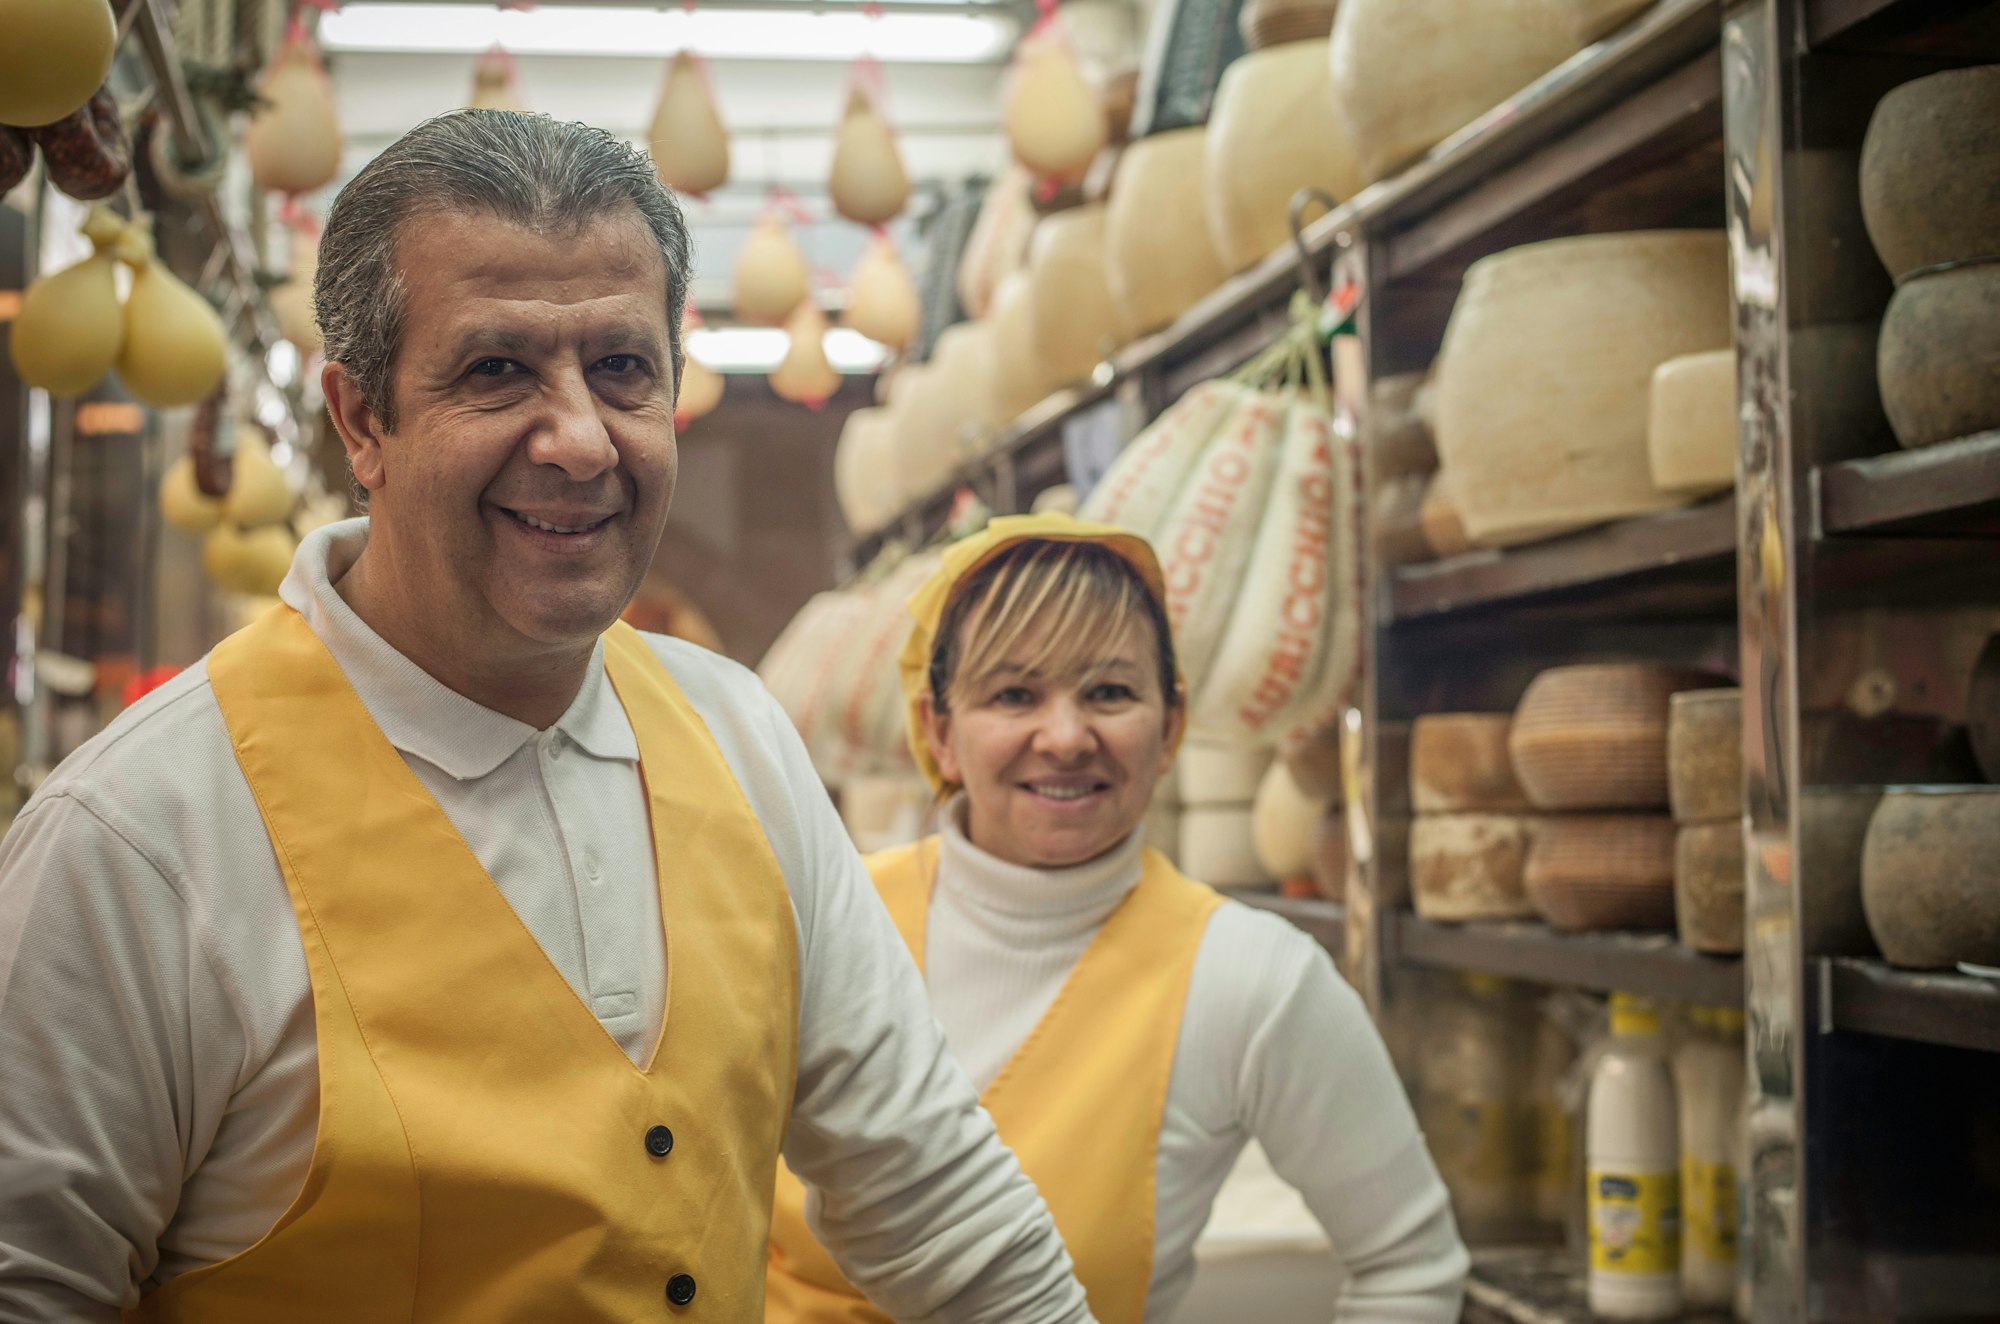 Man and woman in cheese shop